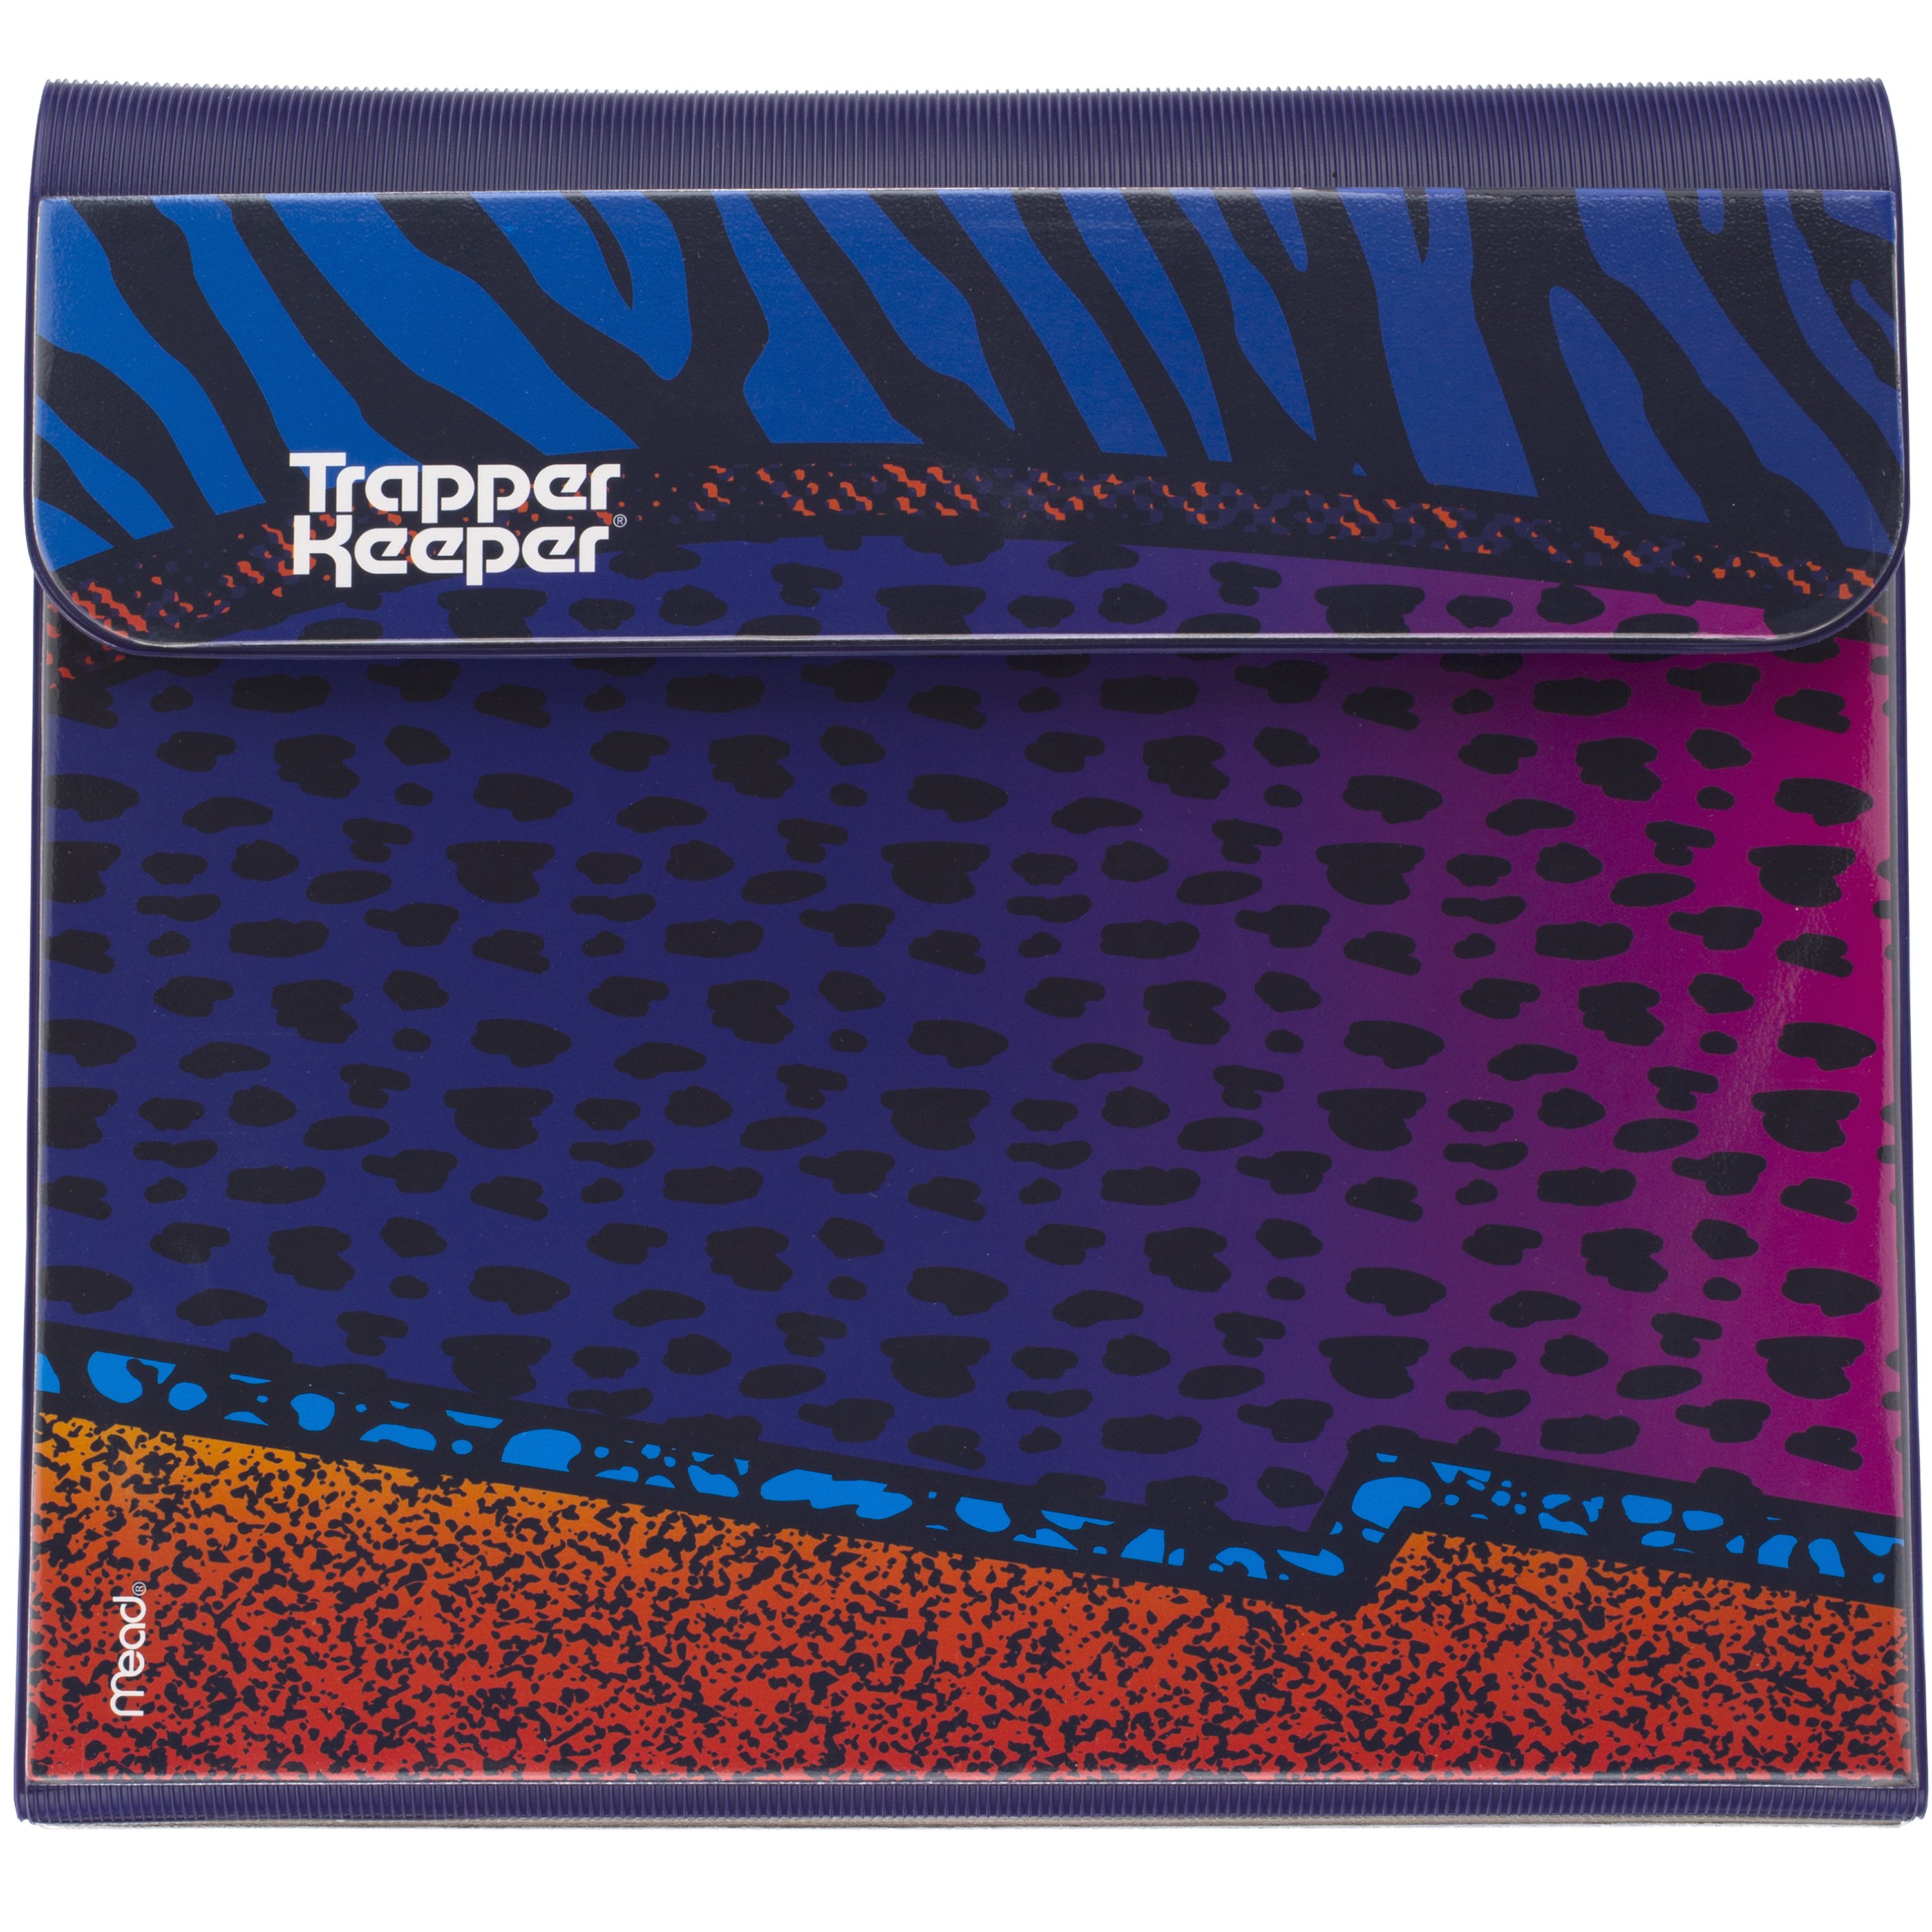 The trapper keeper is back! 